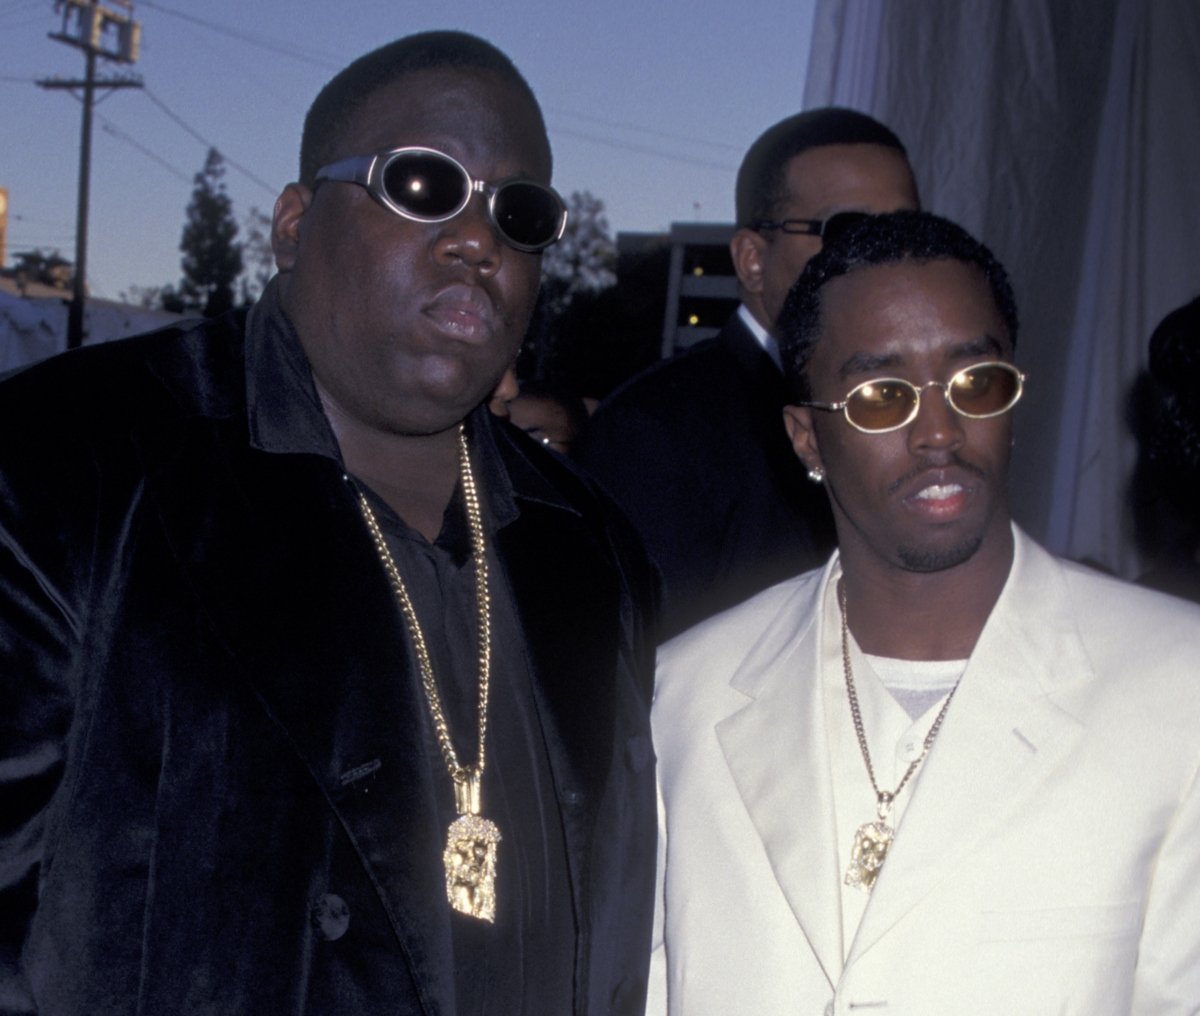 Notorious B.I.G. and Sean ‘Diddy’ Combs at Soul Train Music Awards, 1997